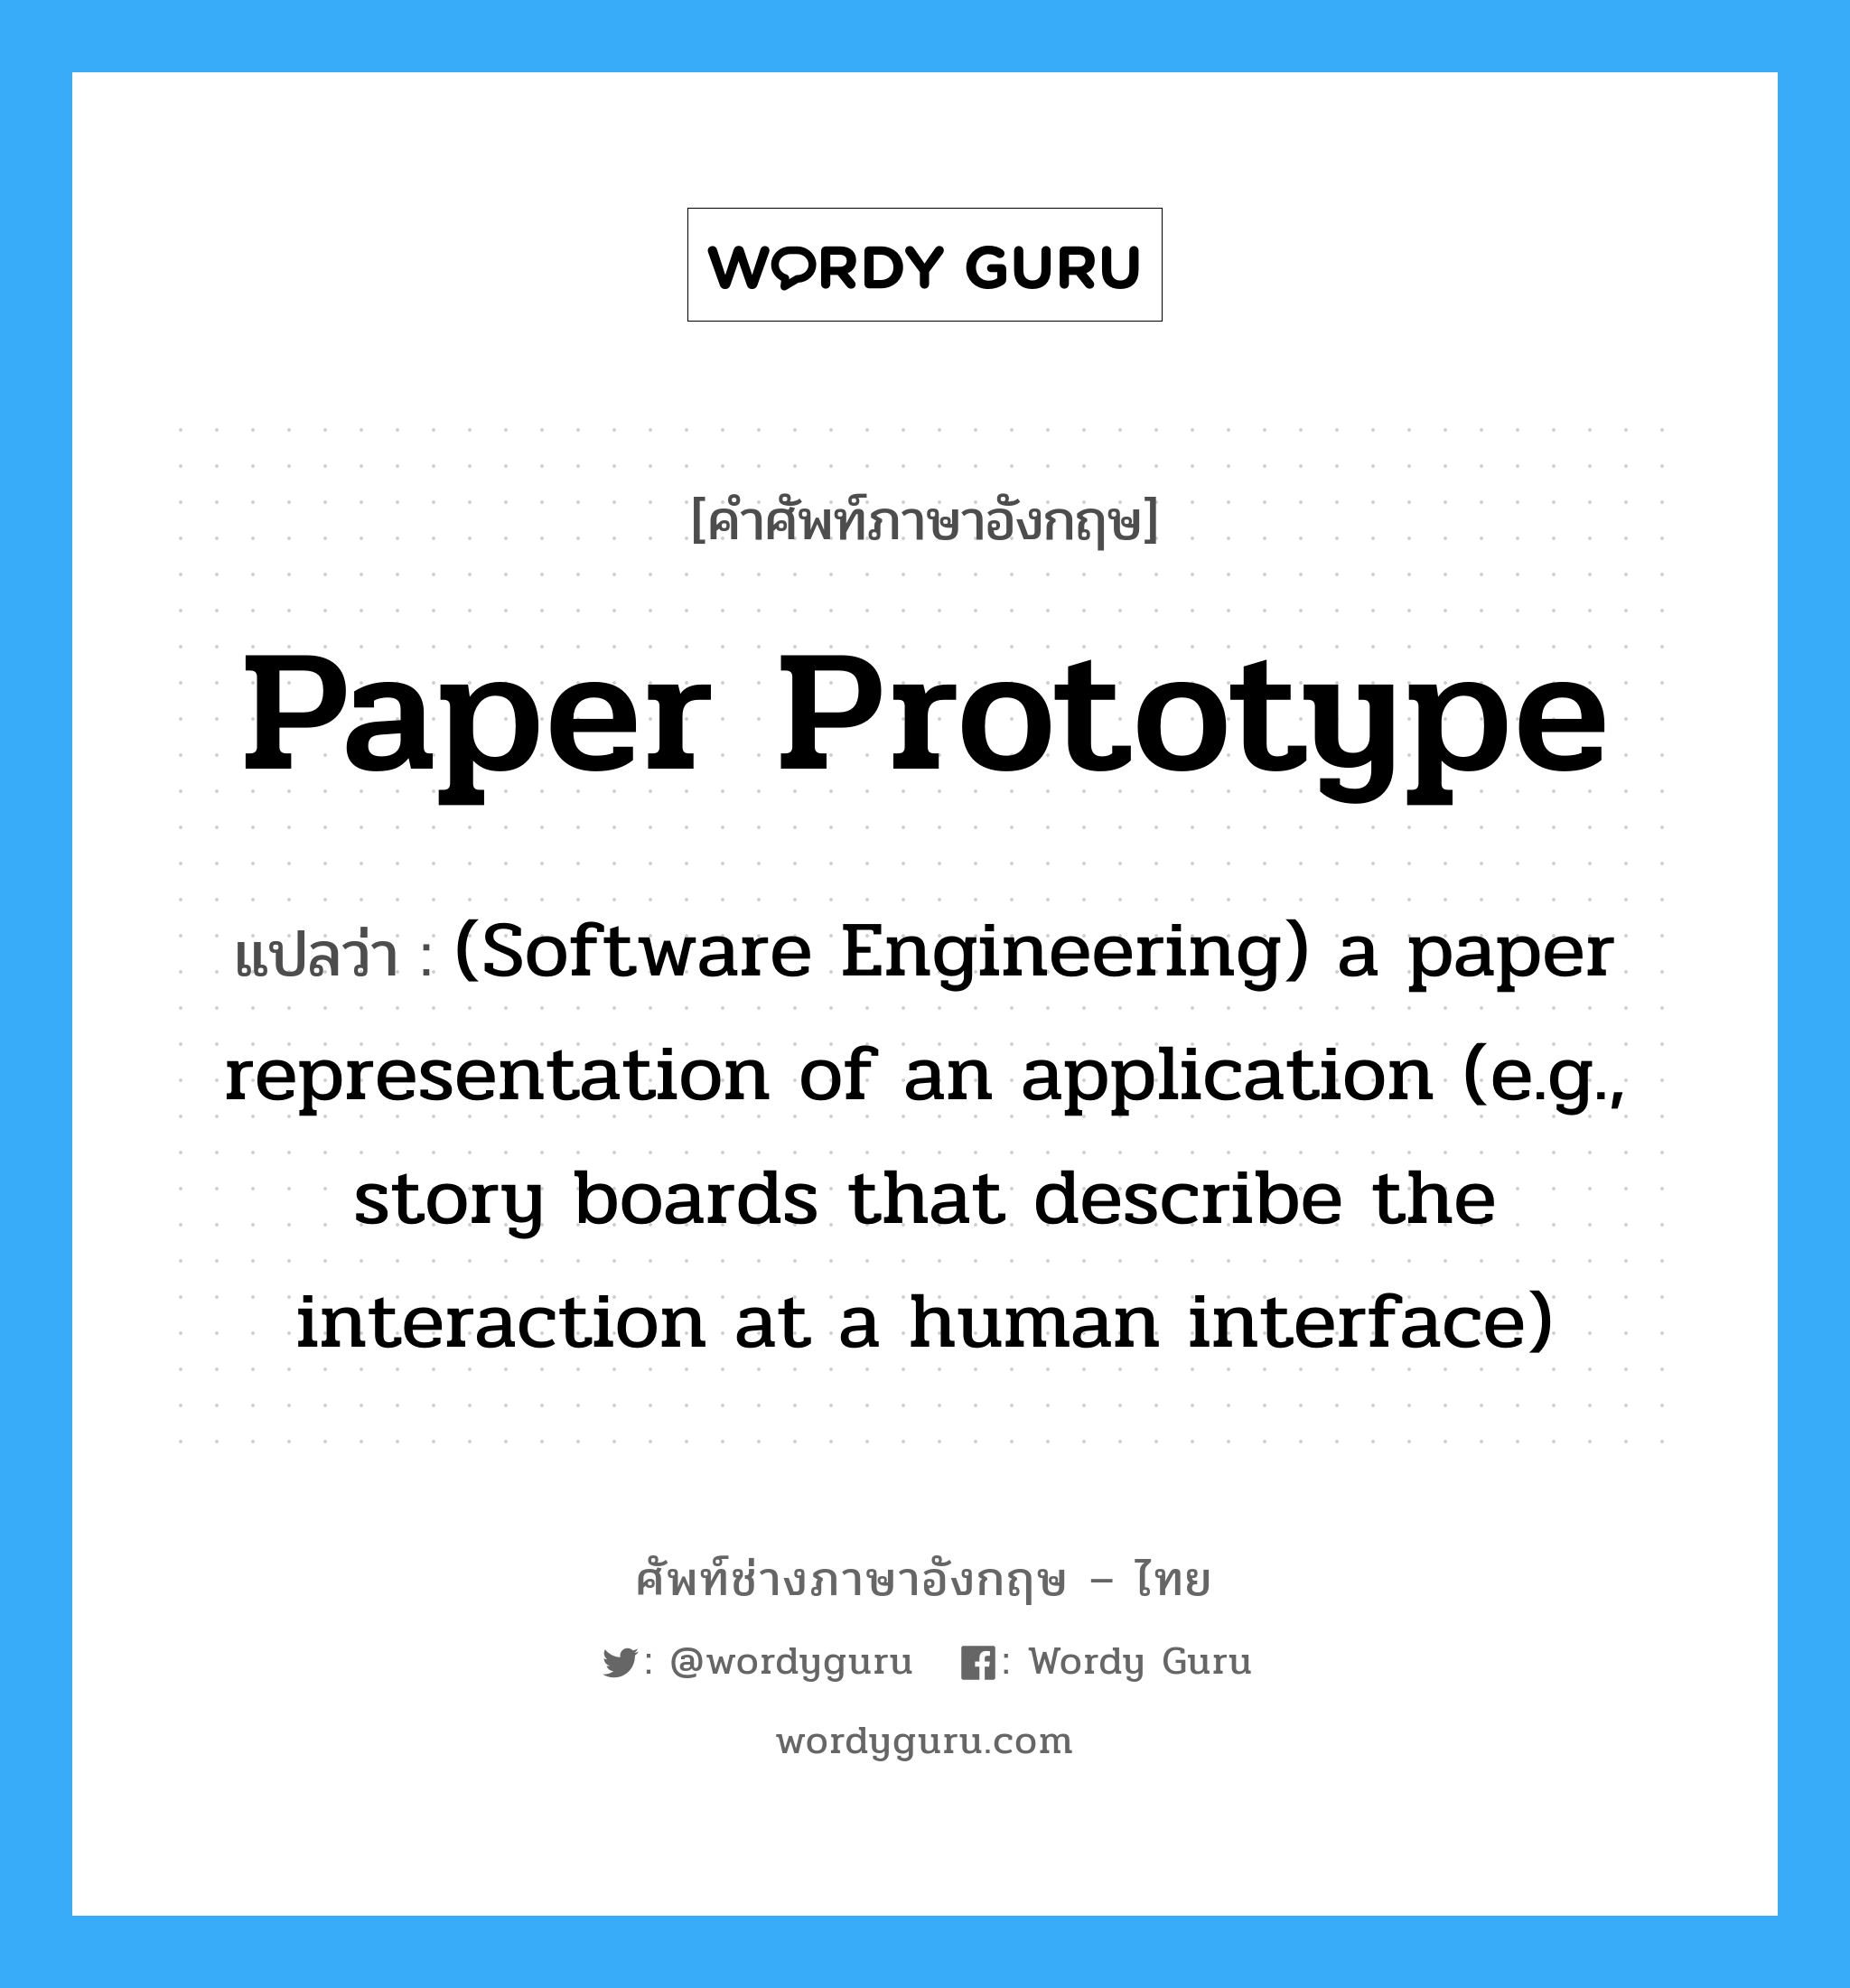 Paper prototype แปลว่า?, คำศัพท์ช่างภาษาอังกฤษ - ไทย Paper prototype คำศัพท์ภาษาอังกฤษ Paper prototype แปลว่า (Software Engineering) a paper representation of an application (e.g., story boards that describe the interaction at a human interface)